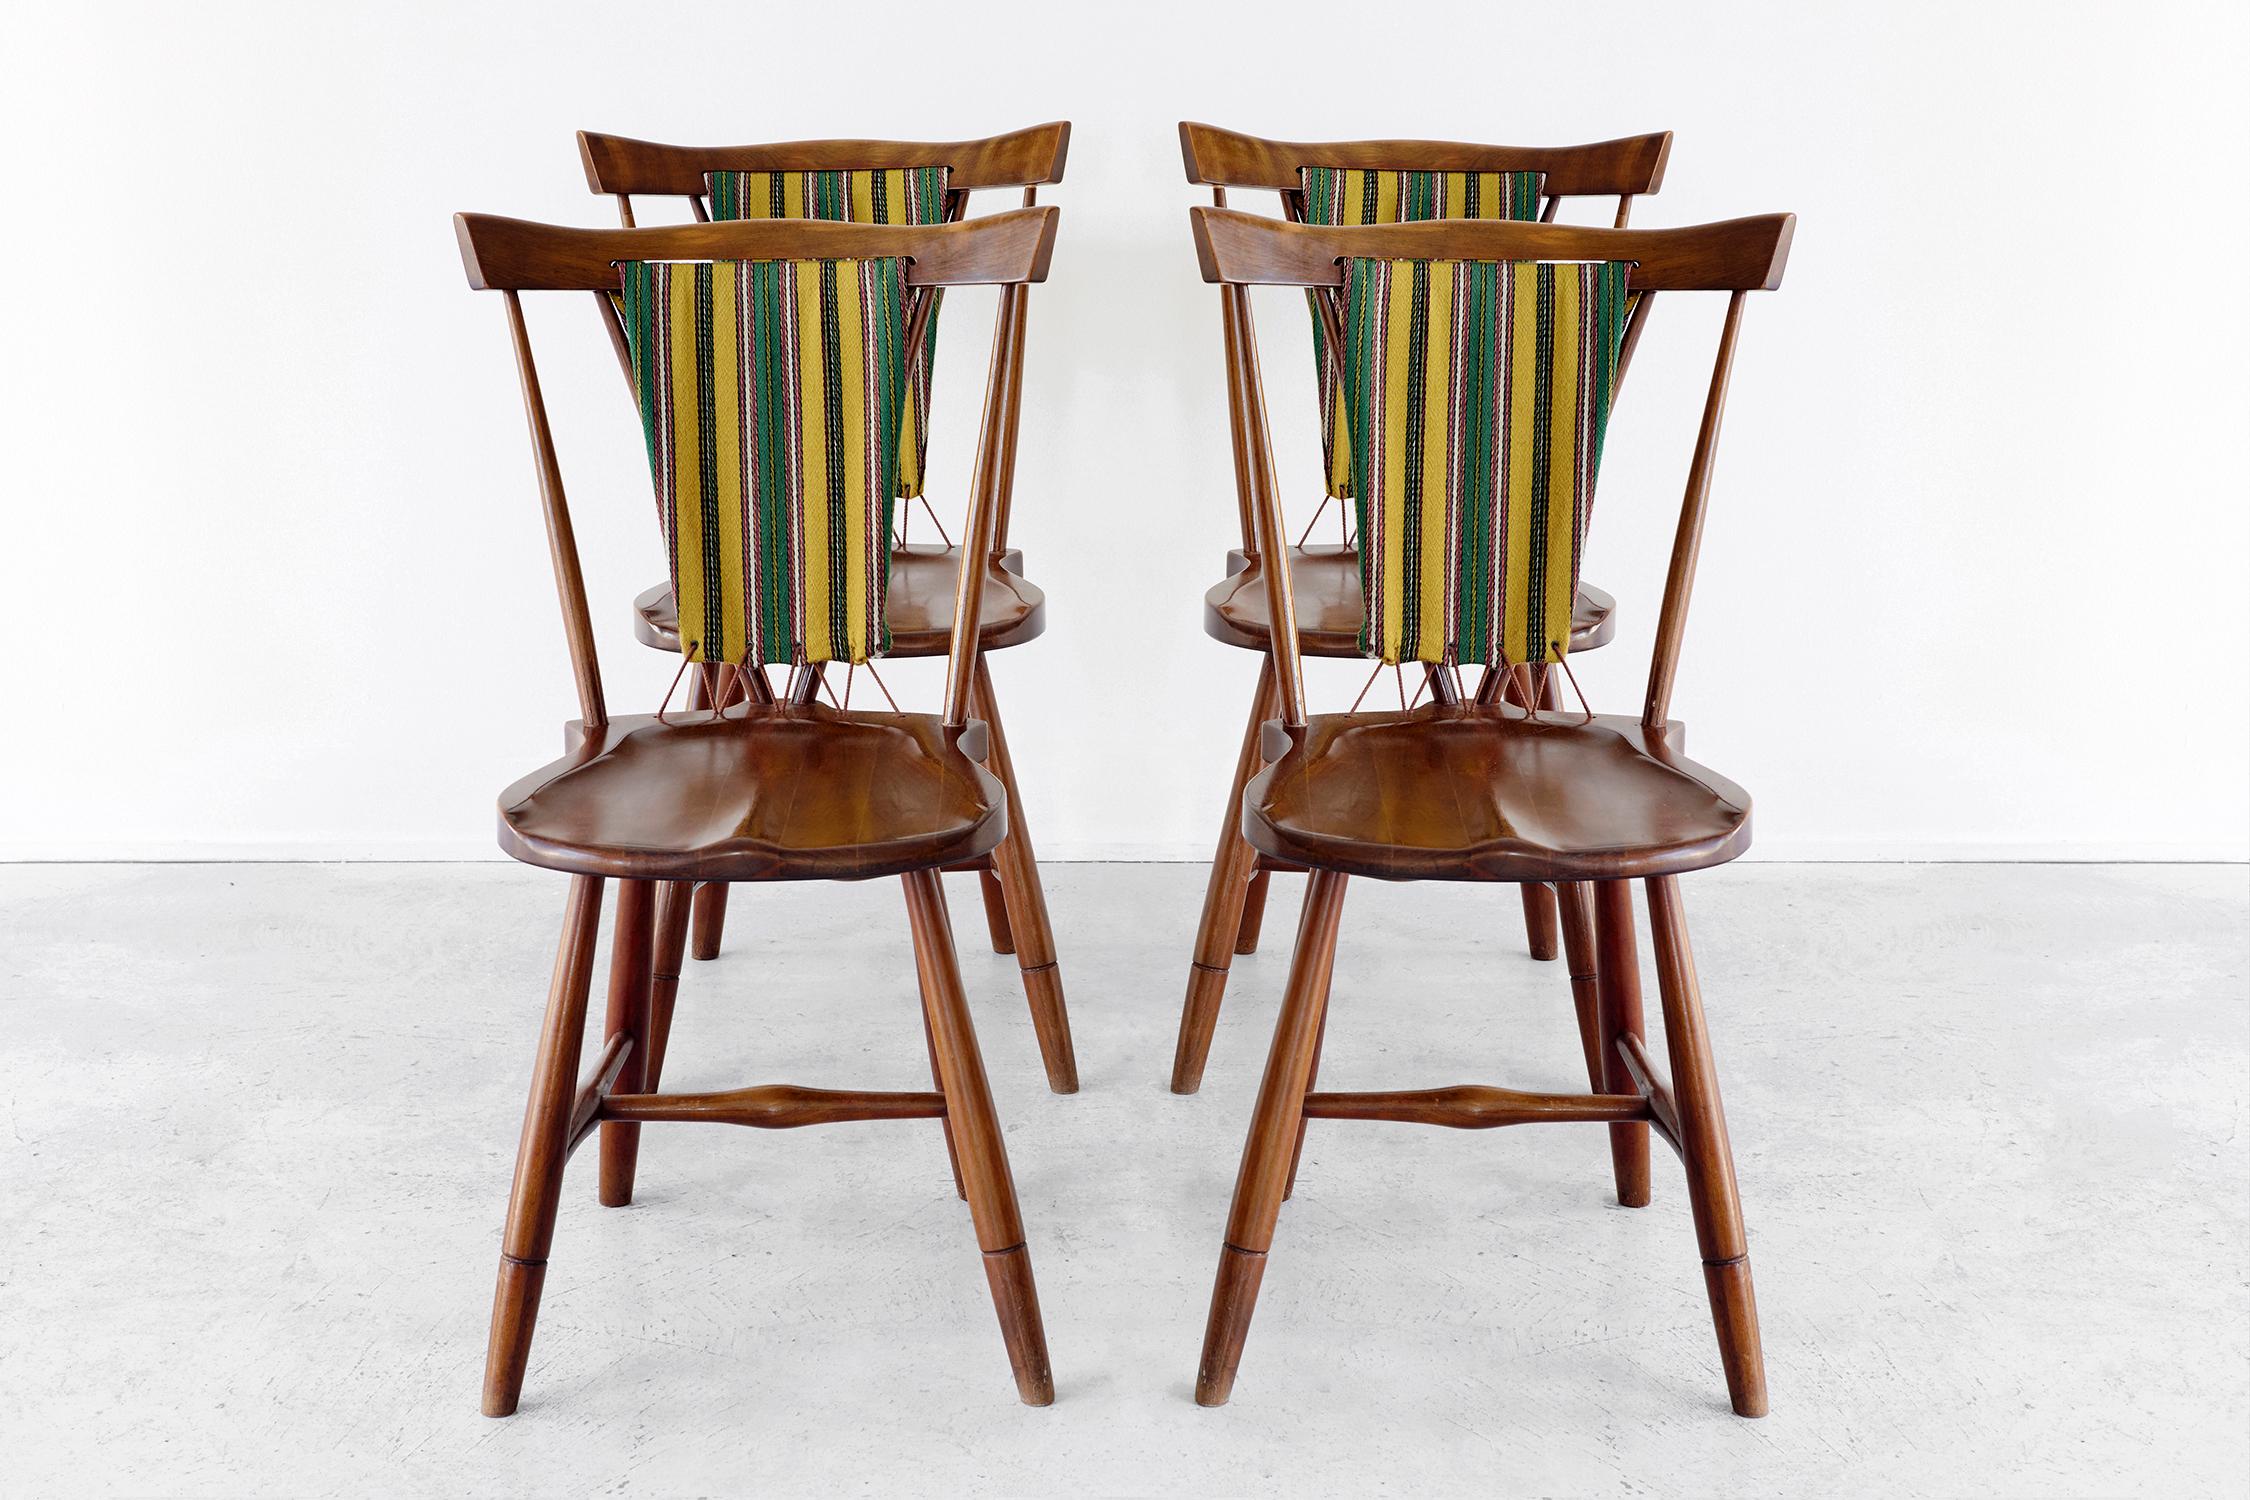 Rare set of Danish Eva & Niles Koppel for Slagelse Mobelvaerk chairs, circa 1947. Original upholstery and cord mix with carved beechwood. Good original condition.